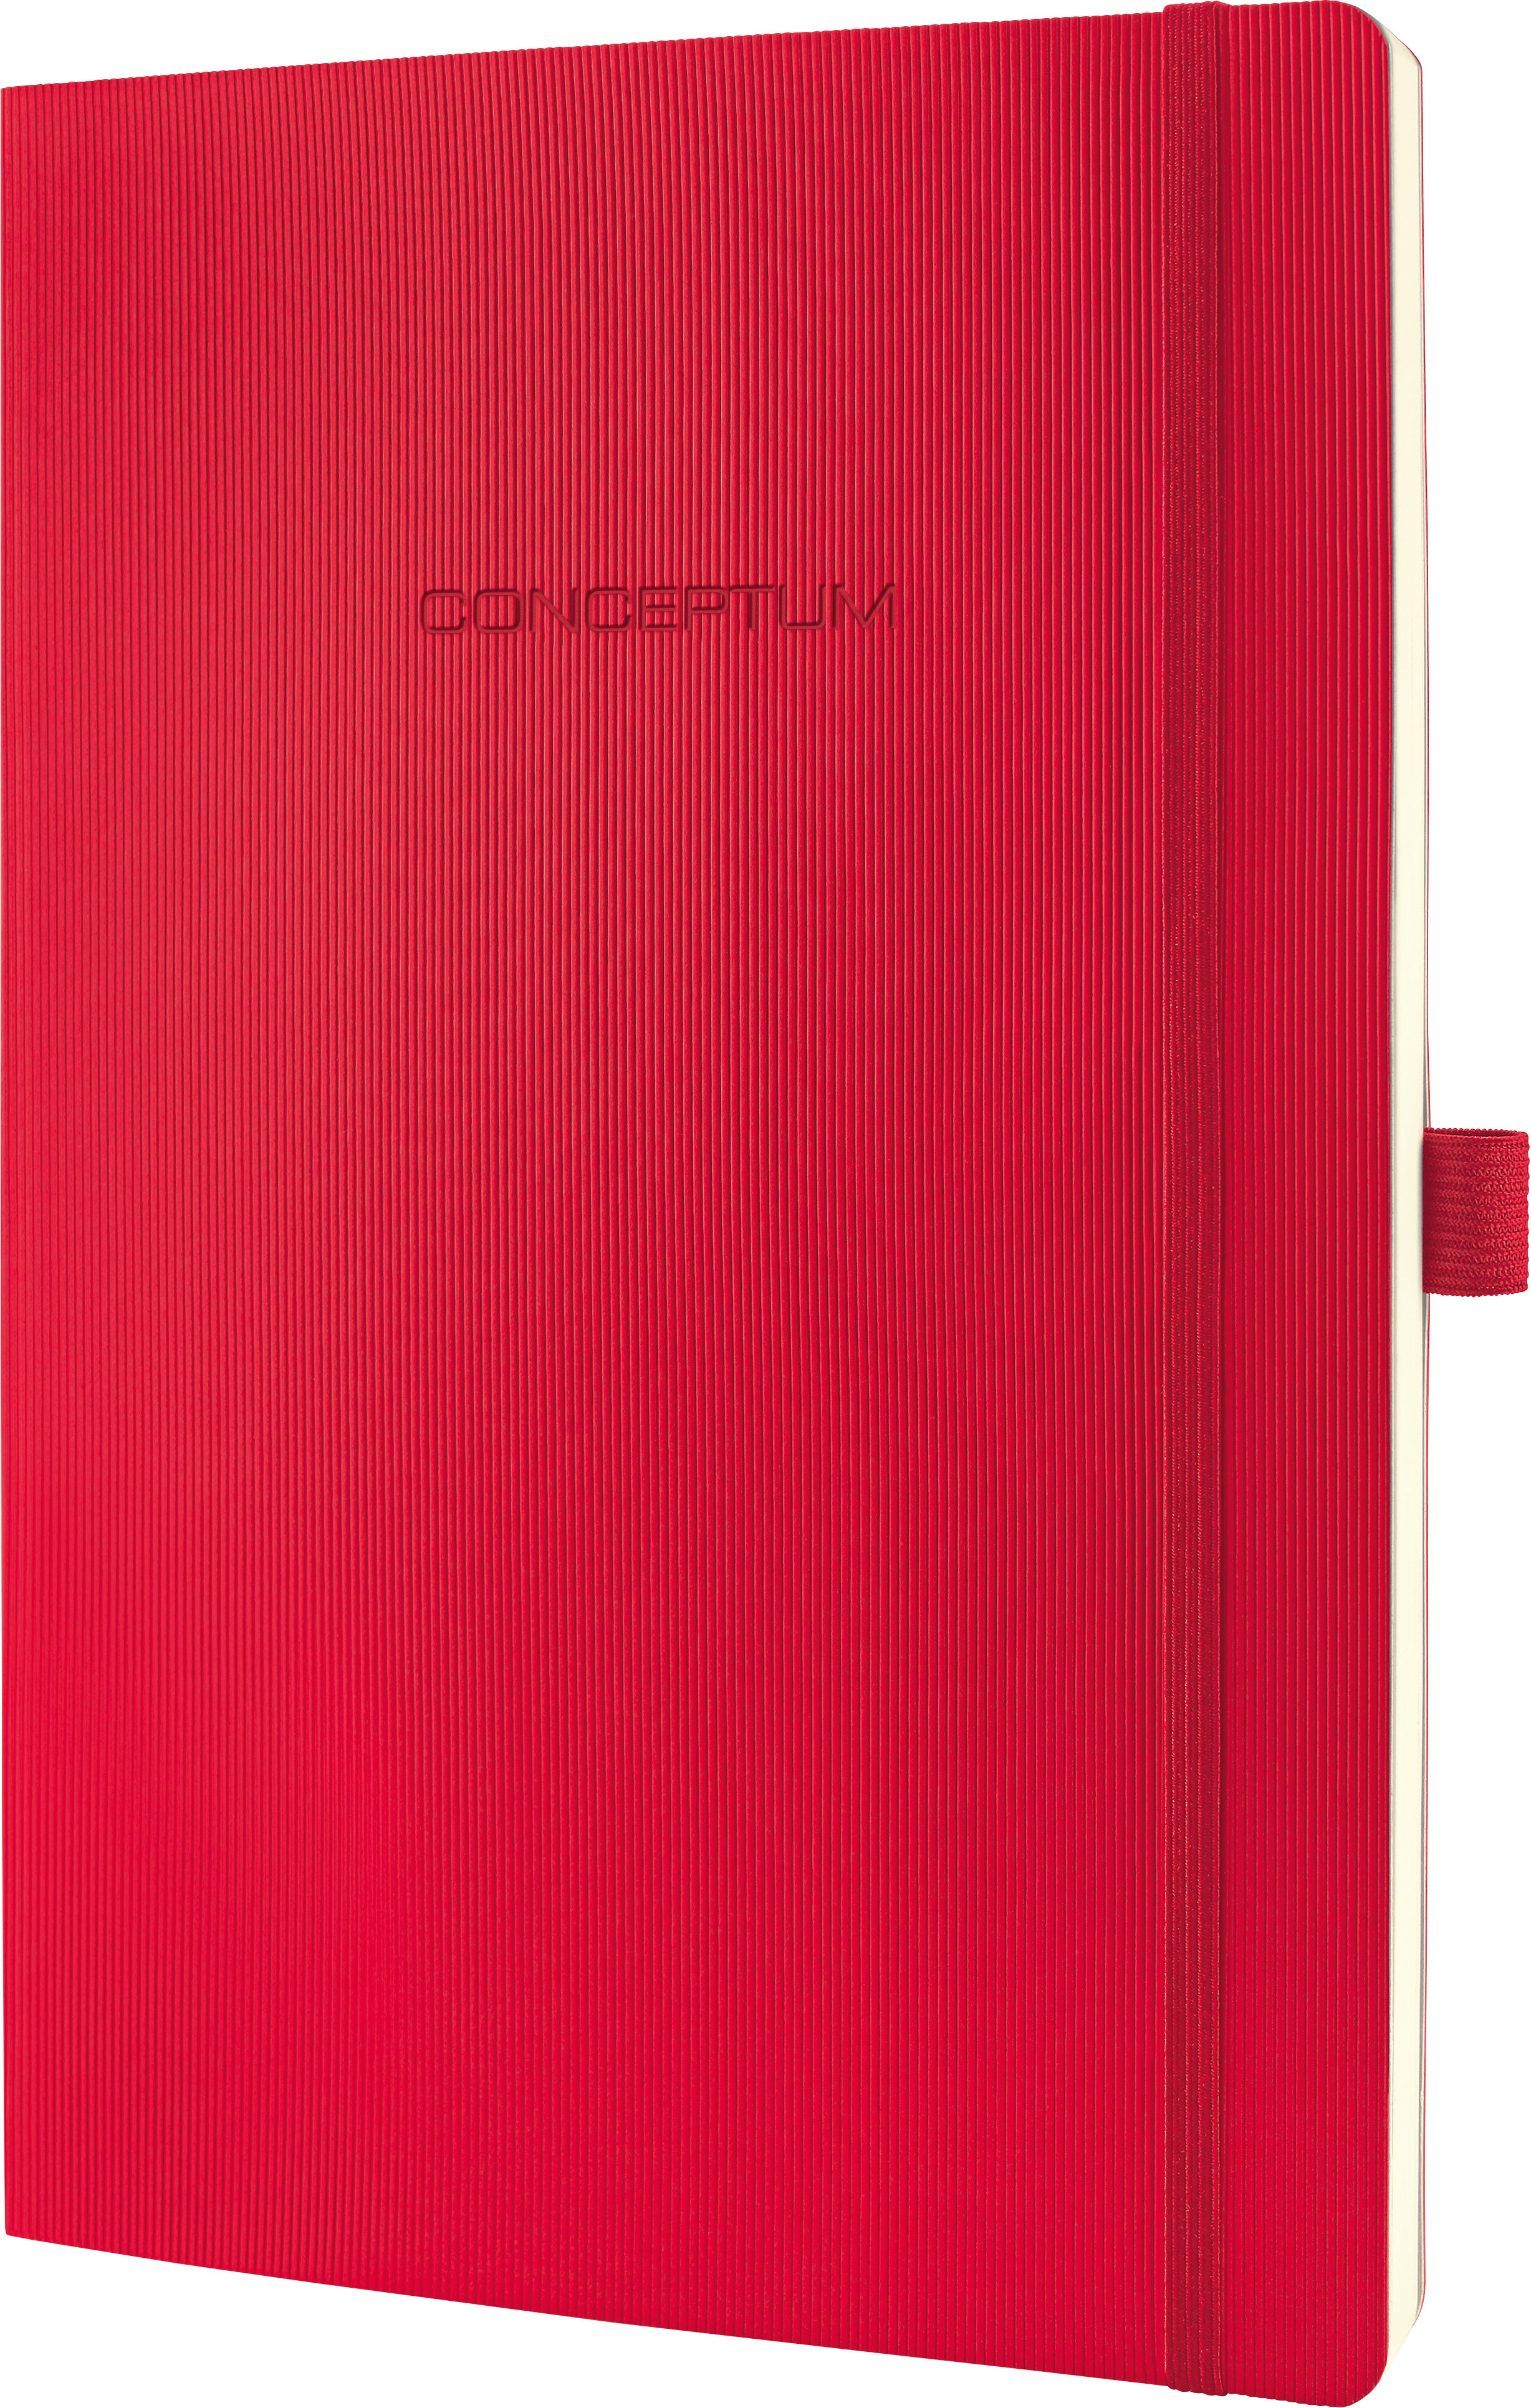 SIGEL Carnet SOFTCOVER CO315 ligné,red 187x270x14mm ligné,red 187x270x14mm